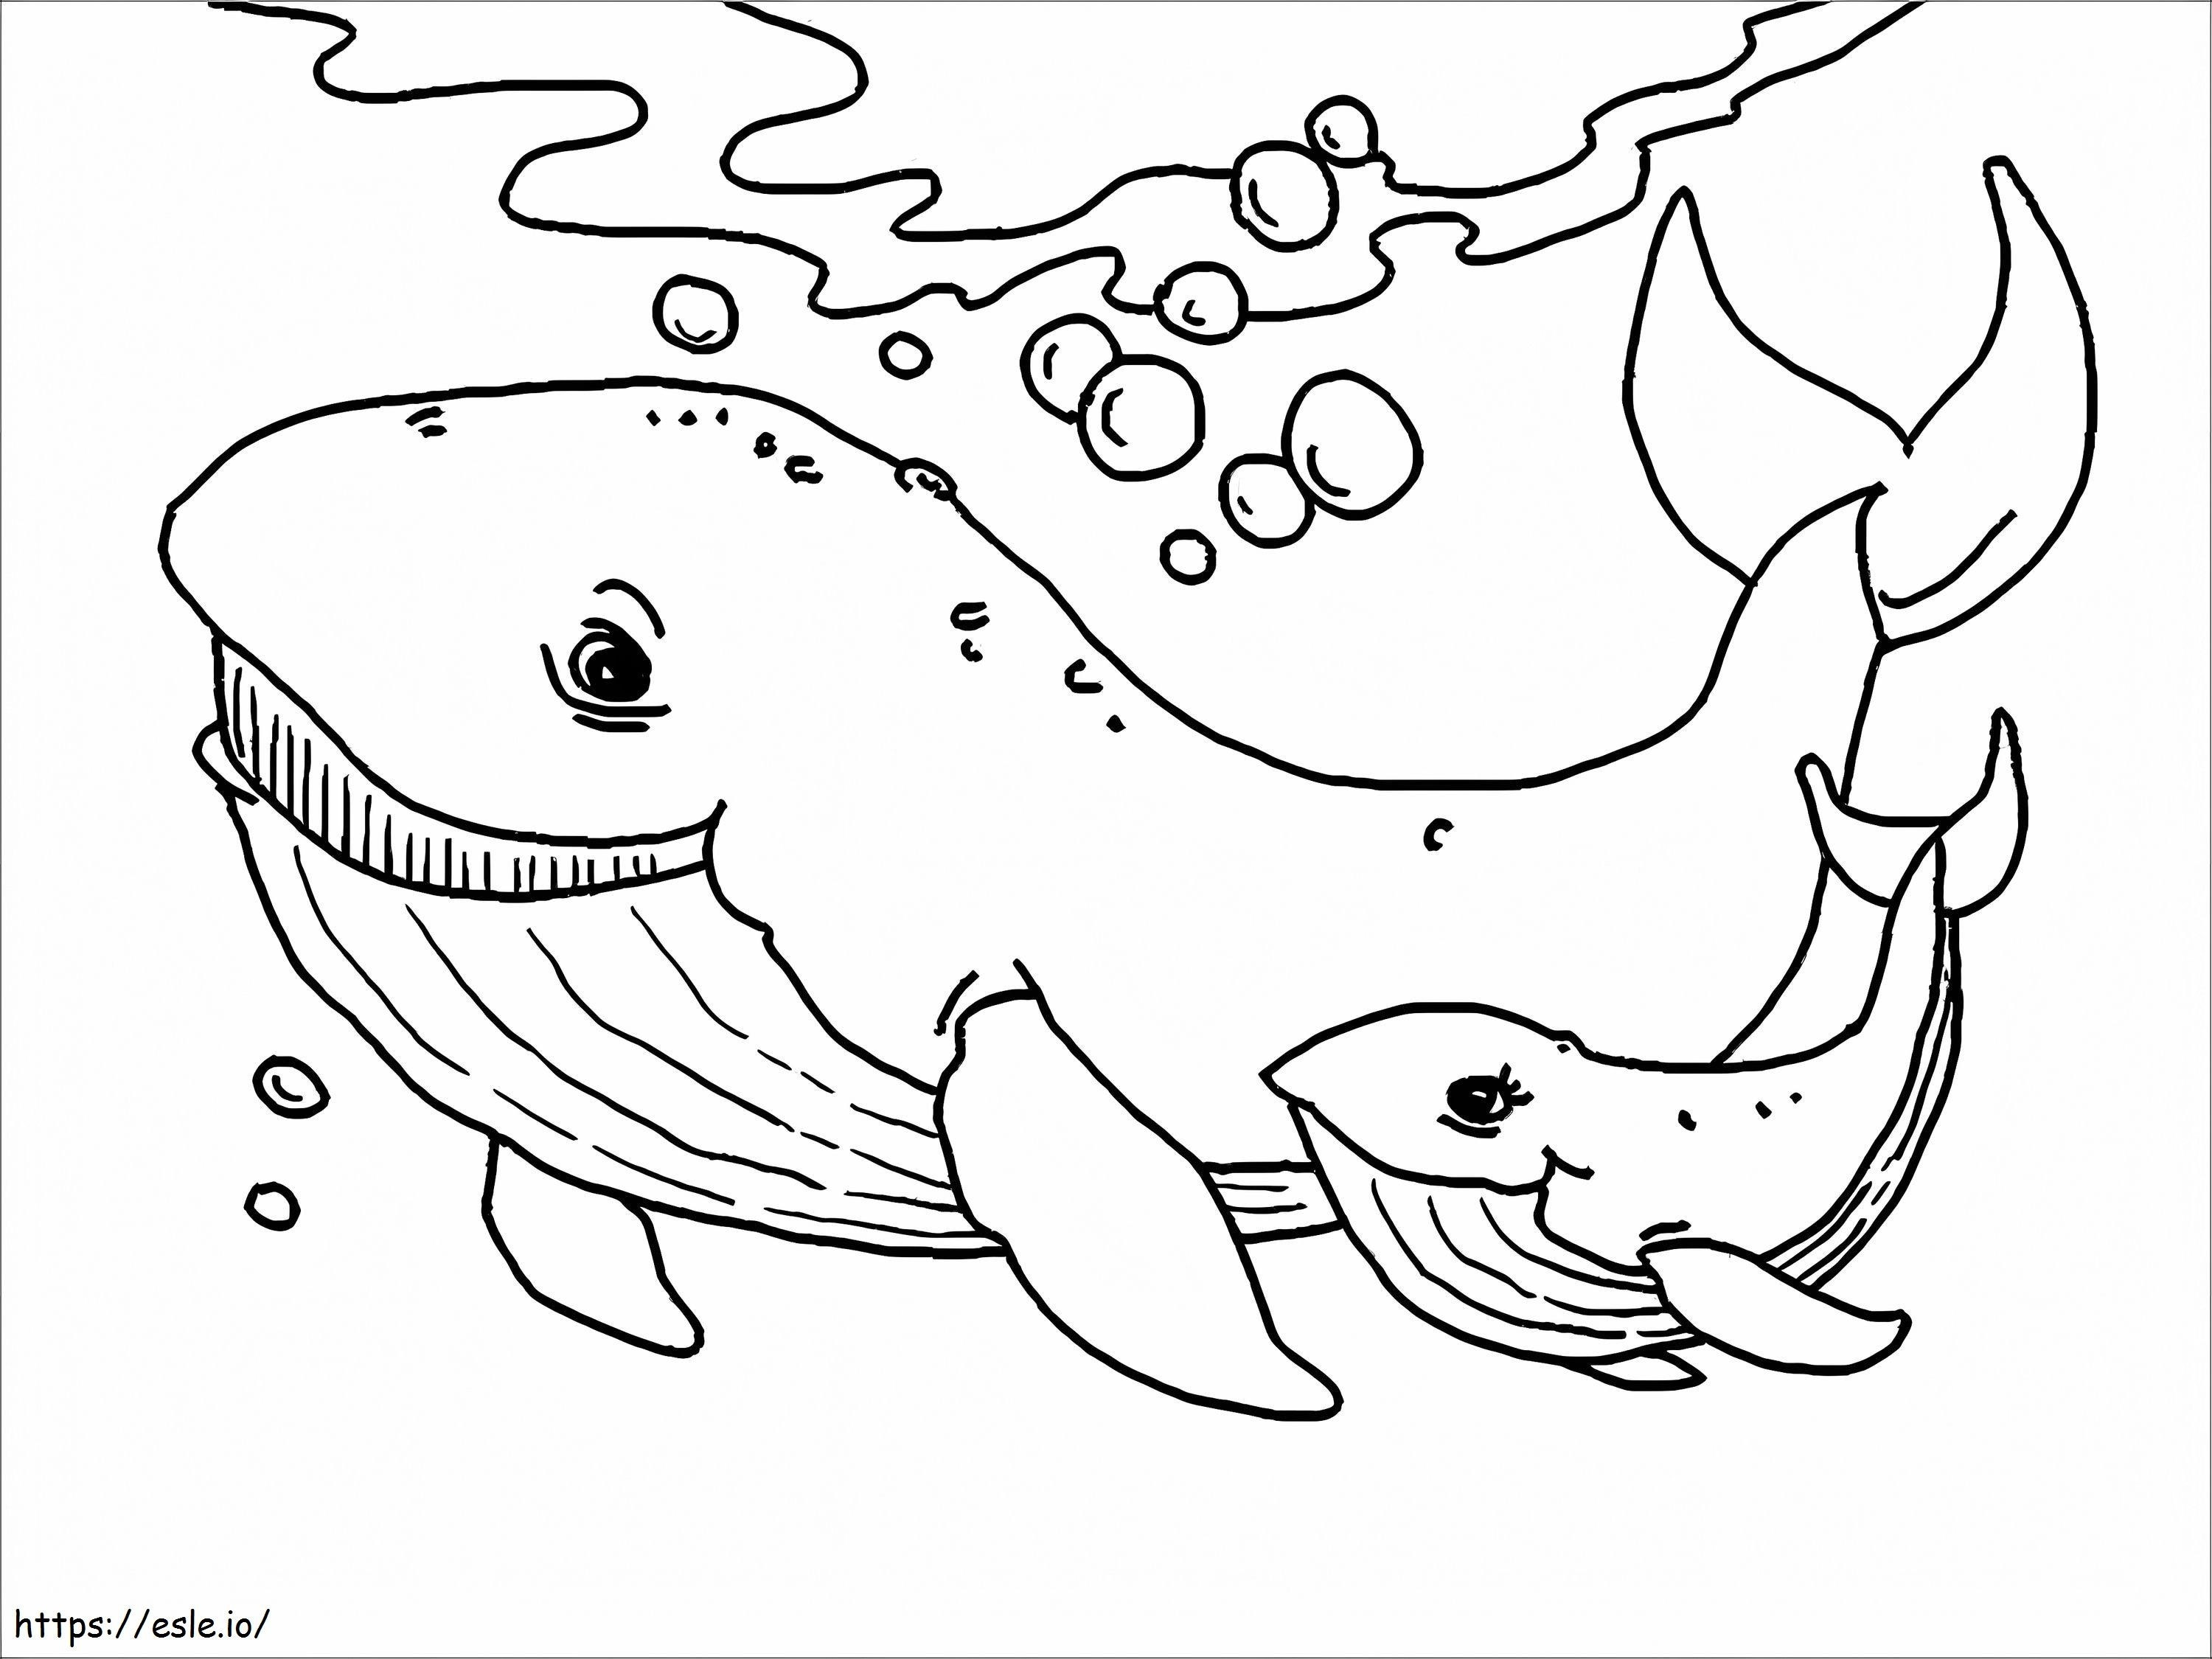 Mother Whale And Baby Whale coloring page